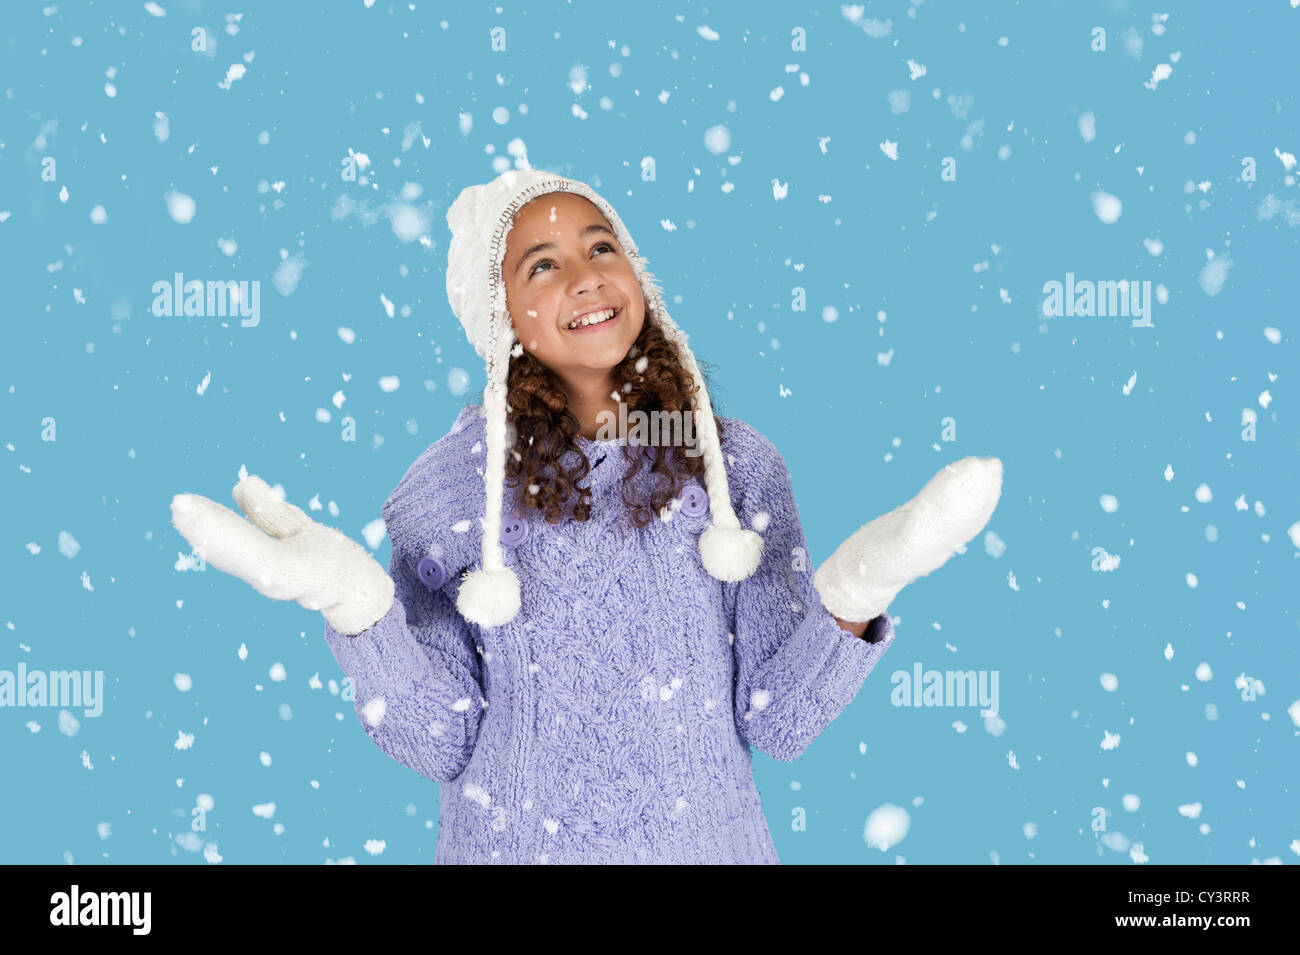 snowing on girl with winter hat and gloves, blue background Stock Photo